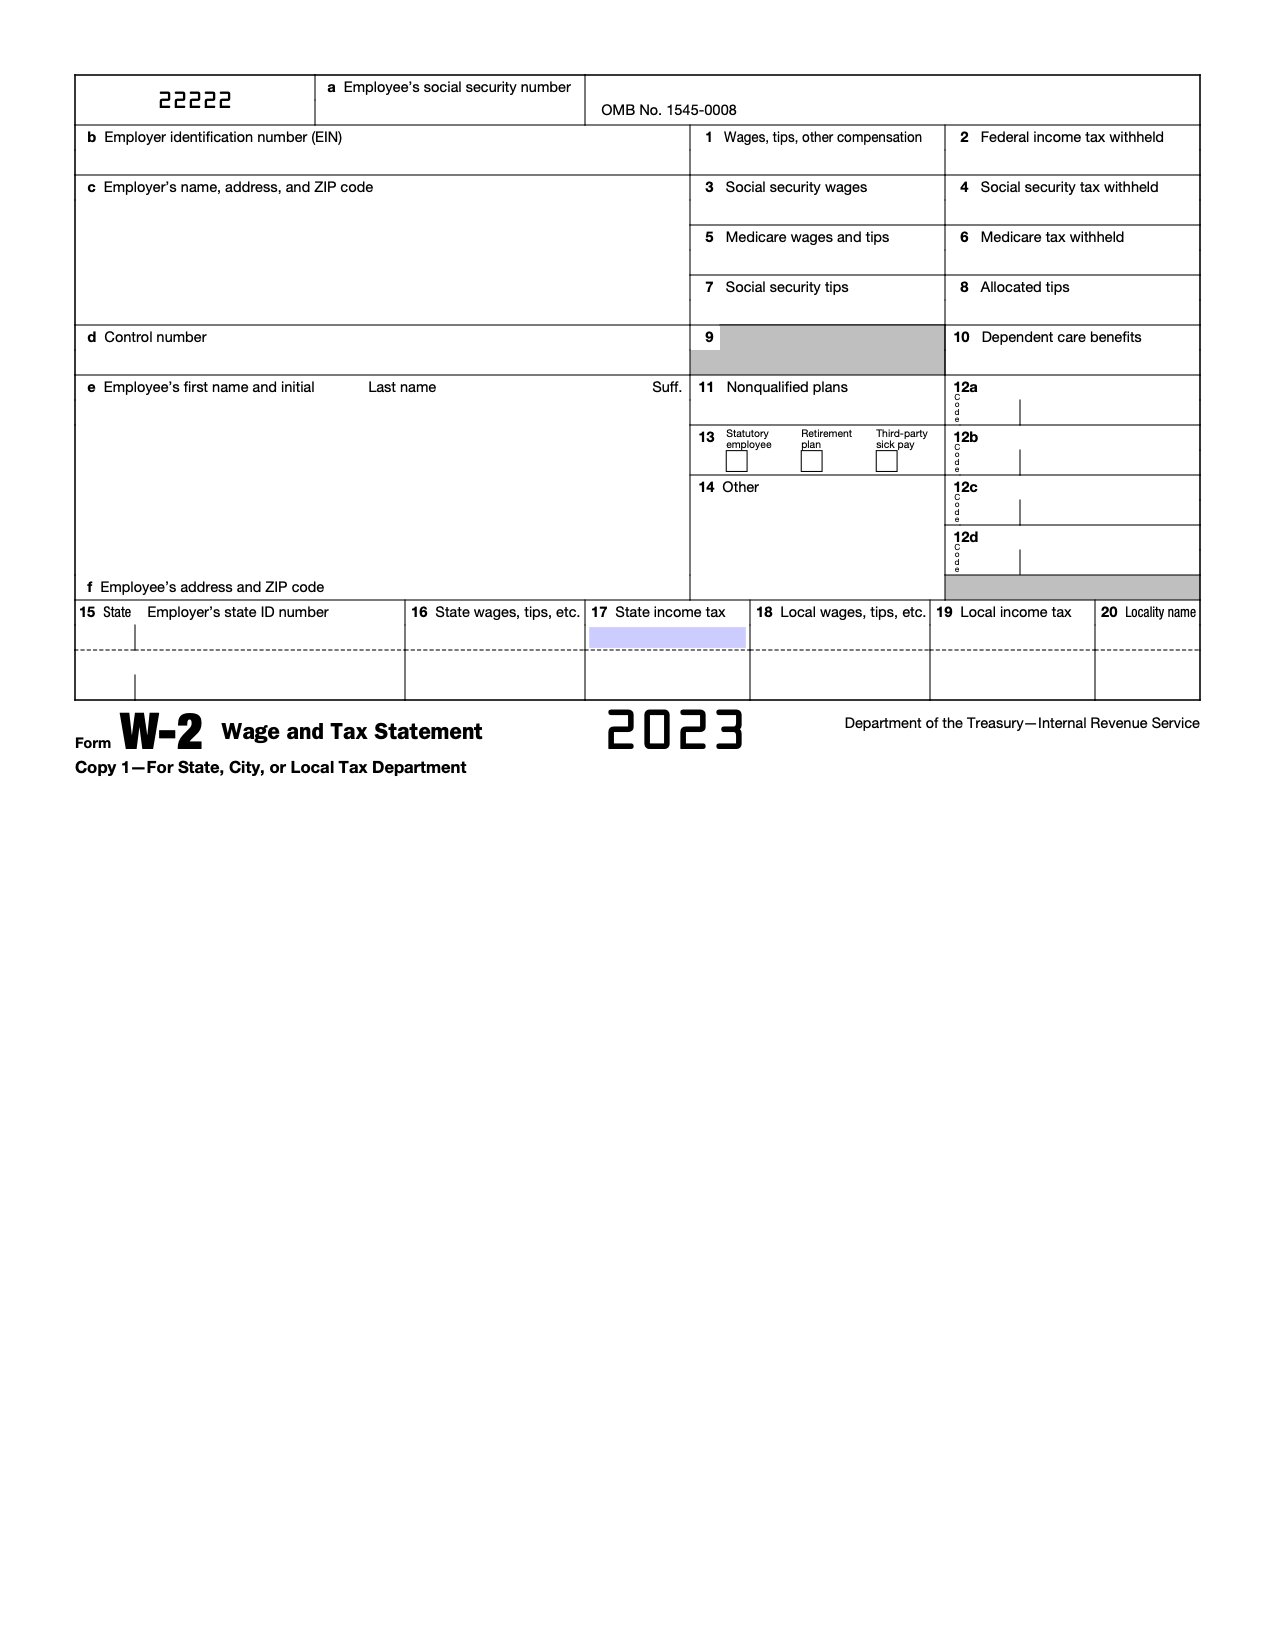 Free Irs Form W-2 | Wage And Tax Statement - Pdf – Eforms within W2 Form Request